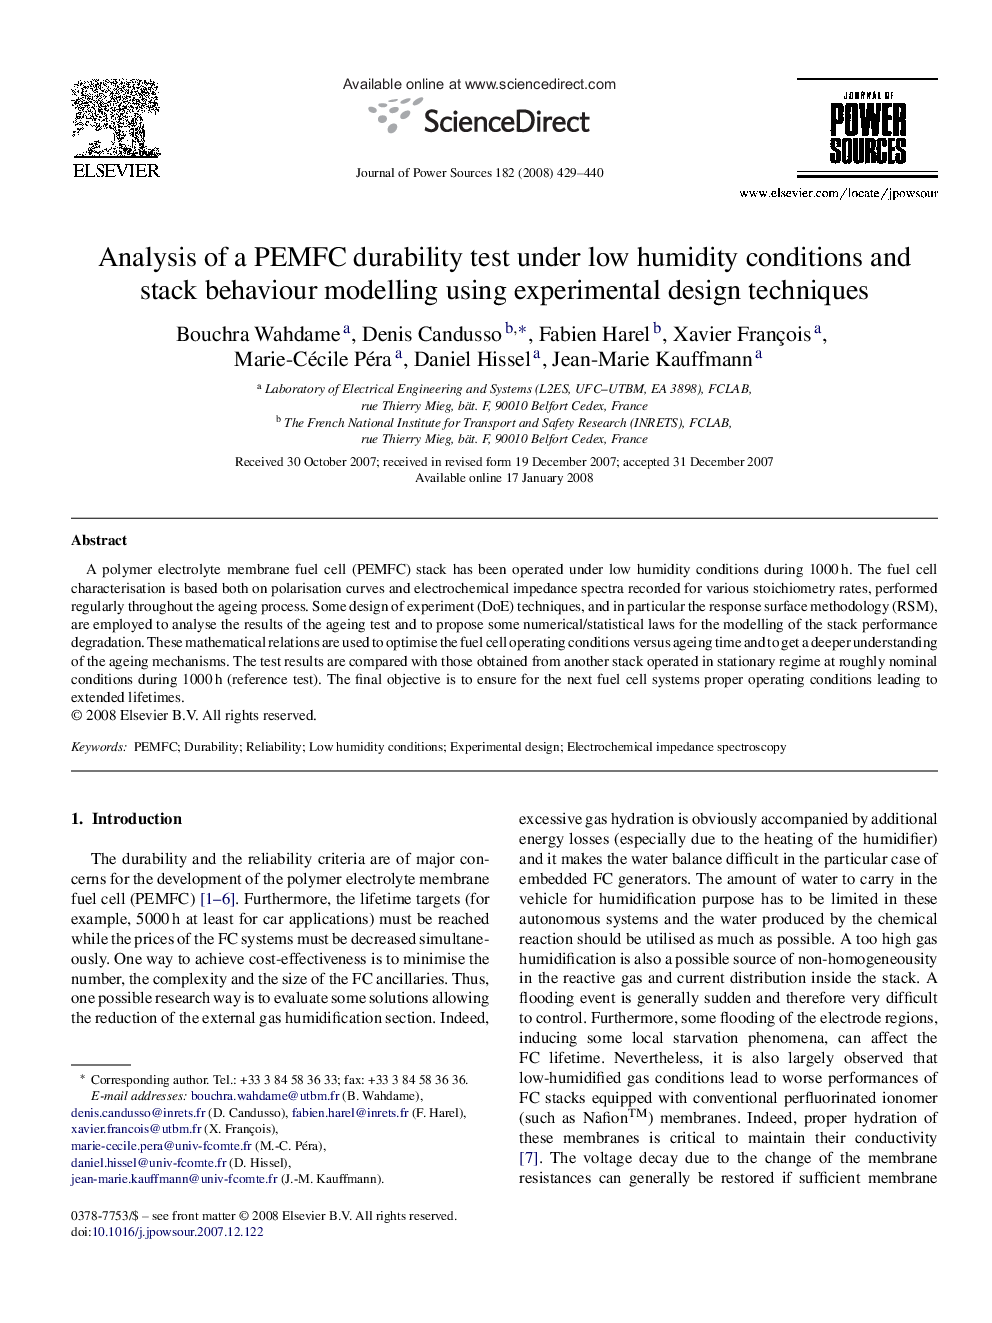 Analysis of a PEMFC durability test under low humidity conditions and stack behaviour modelling using experimental design techniques